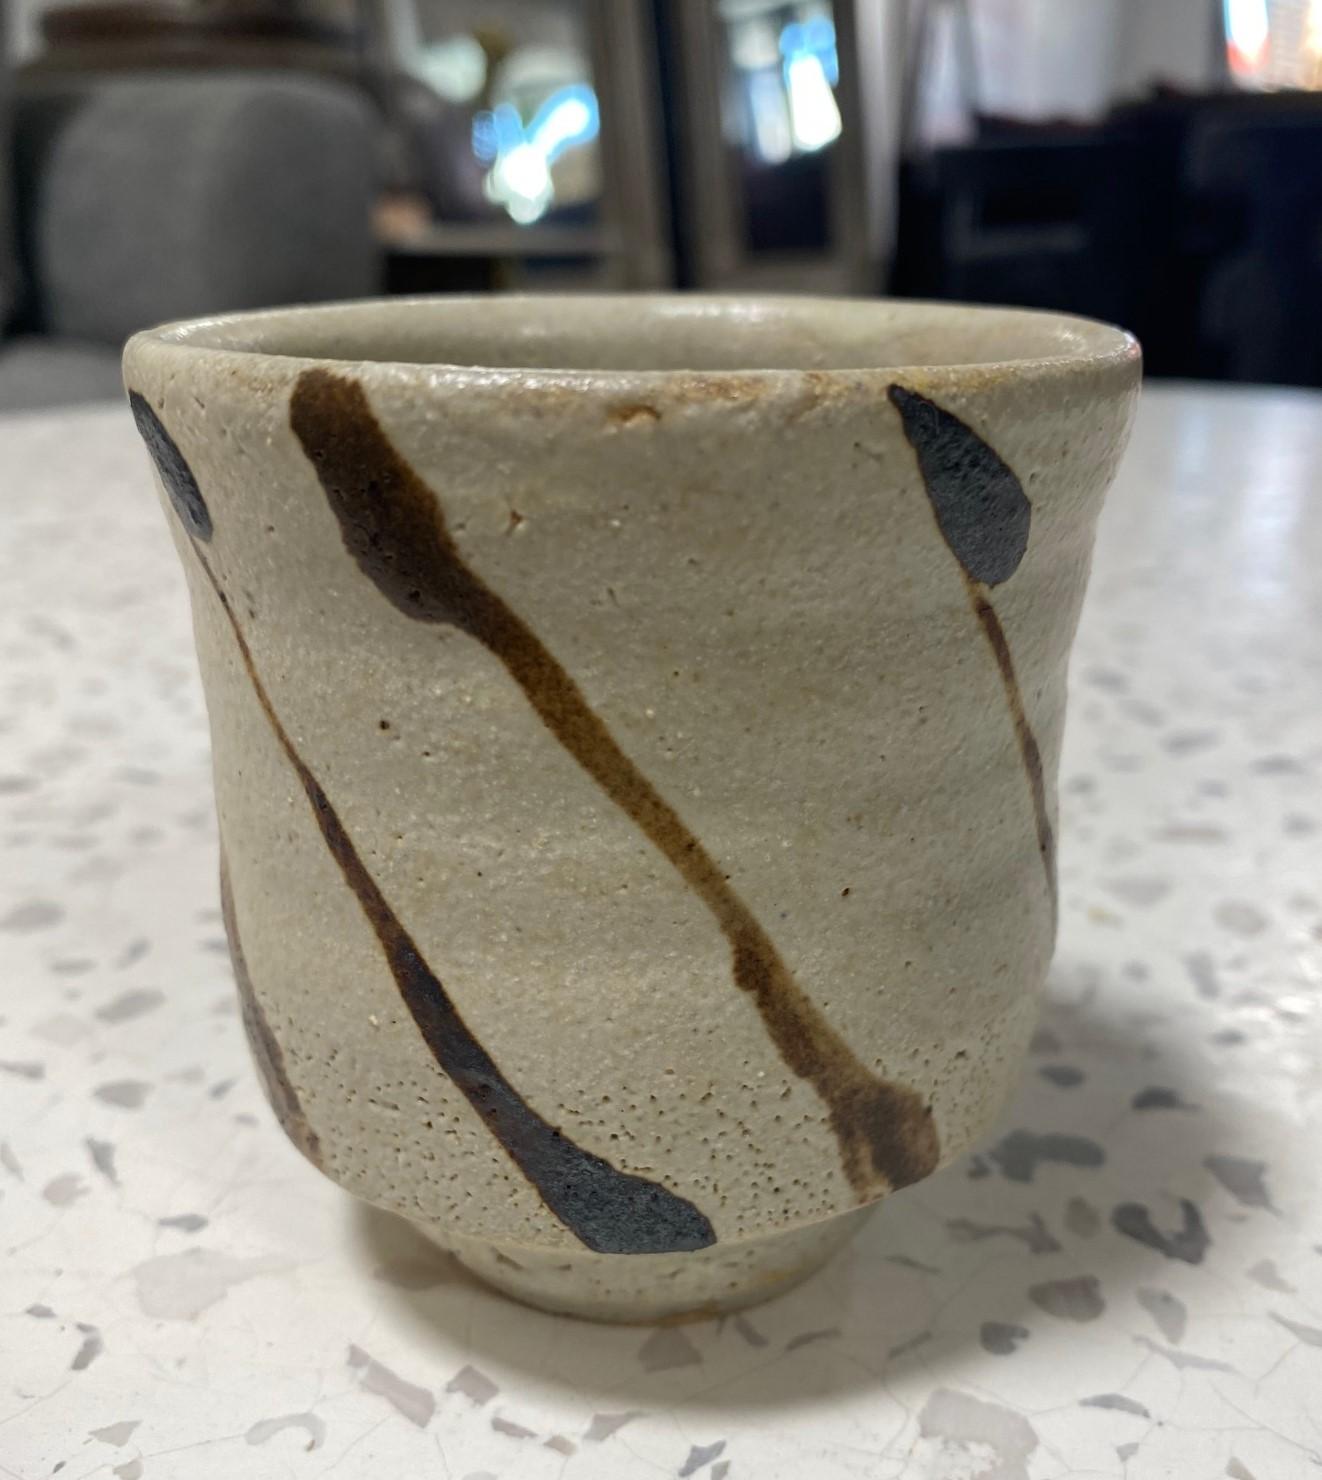 Shoji Hamada Mingei Nuka Glaze Japanese Pottery Yunomi Teacup with Signed Box In Good Condition For Sale In Studio City, CA